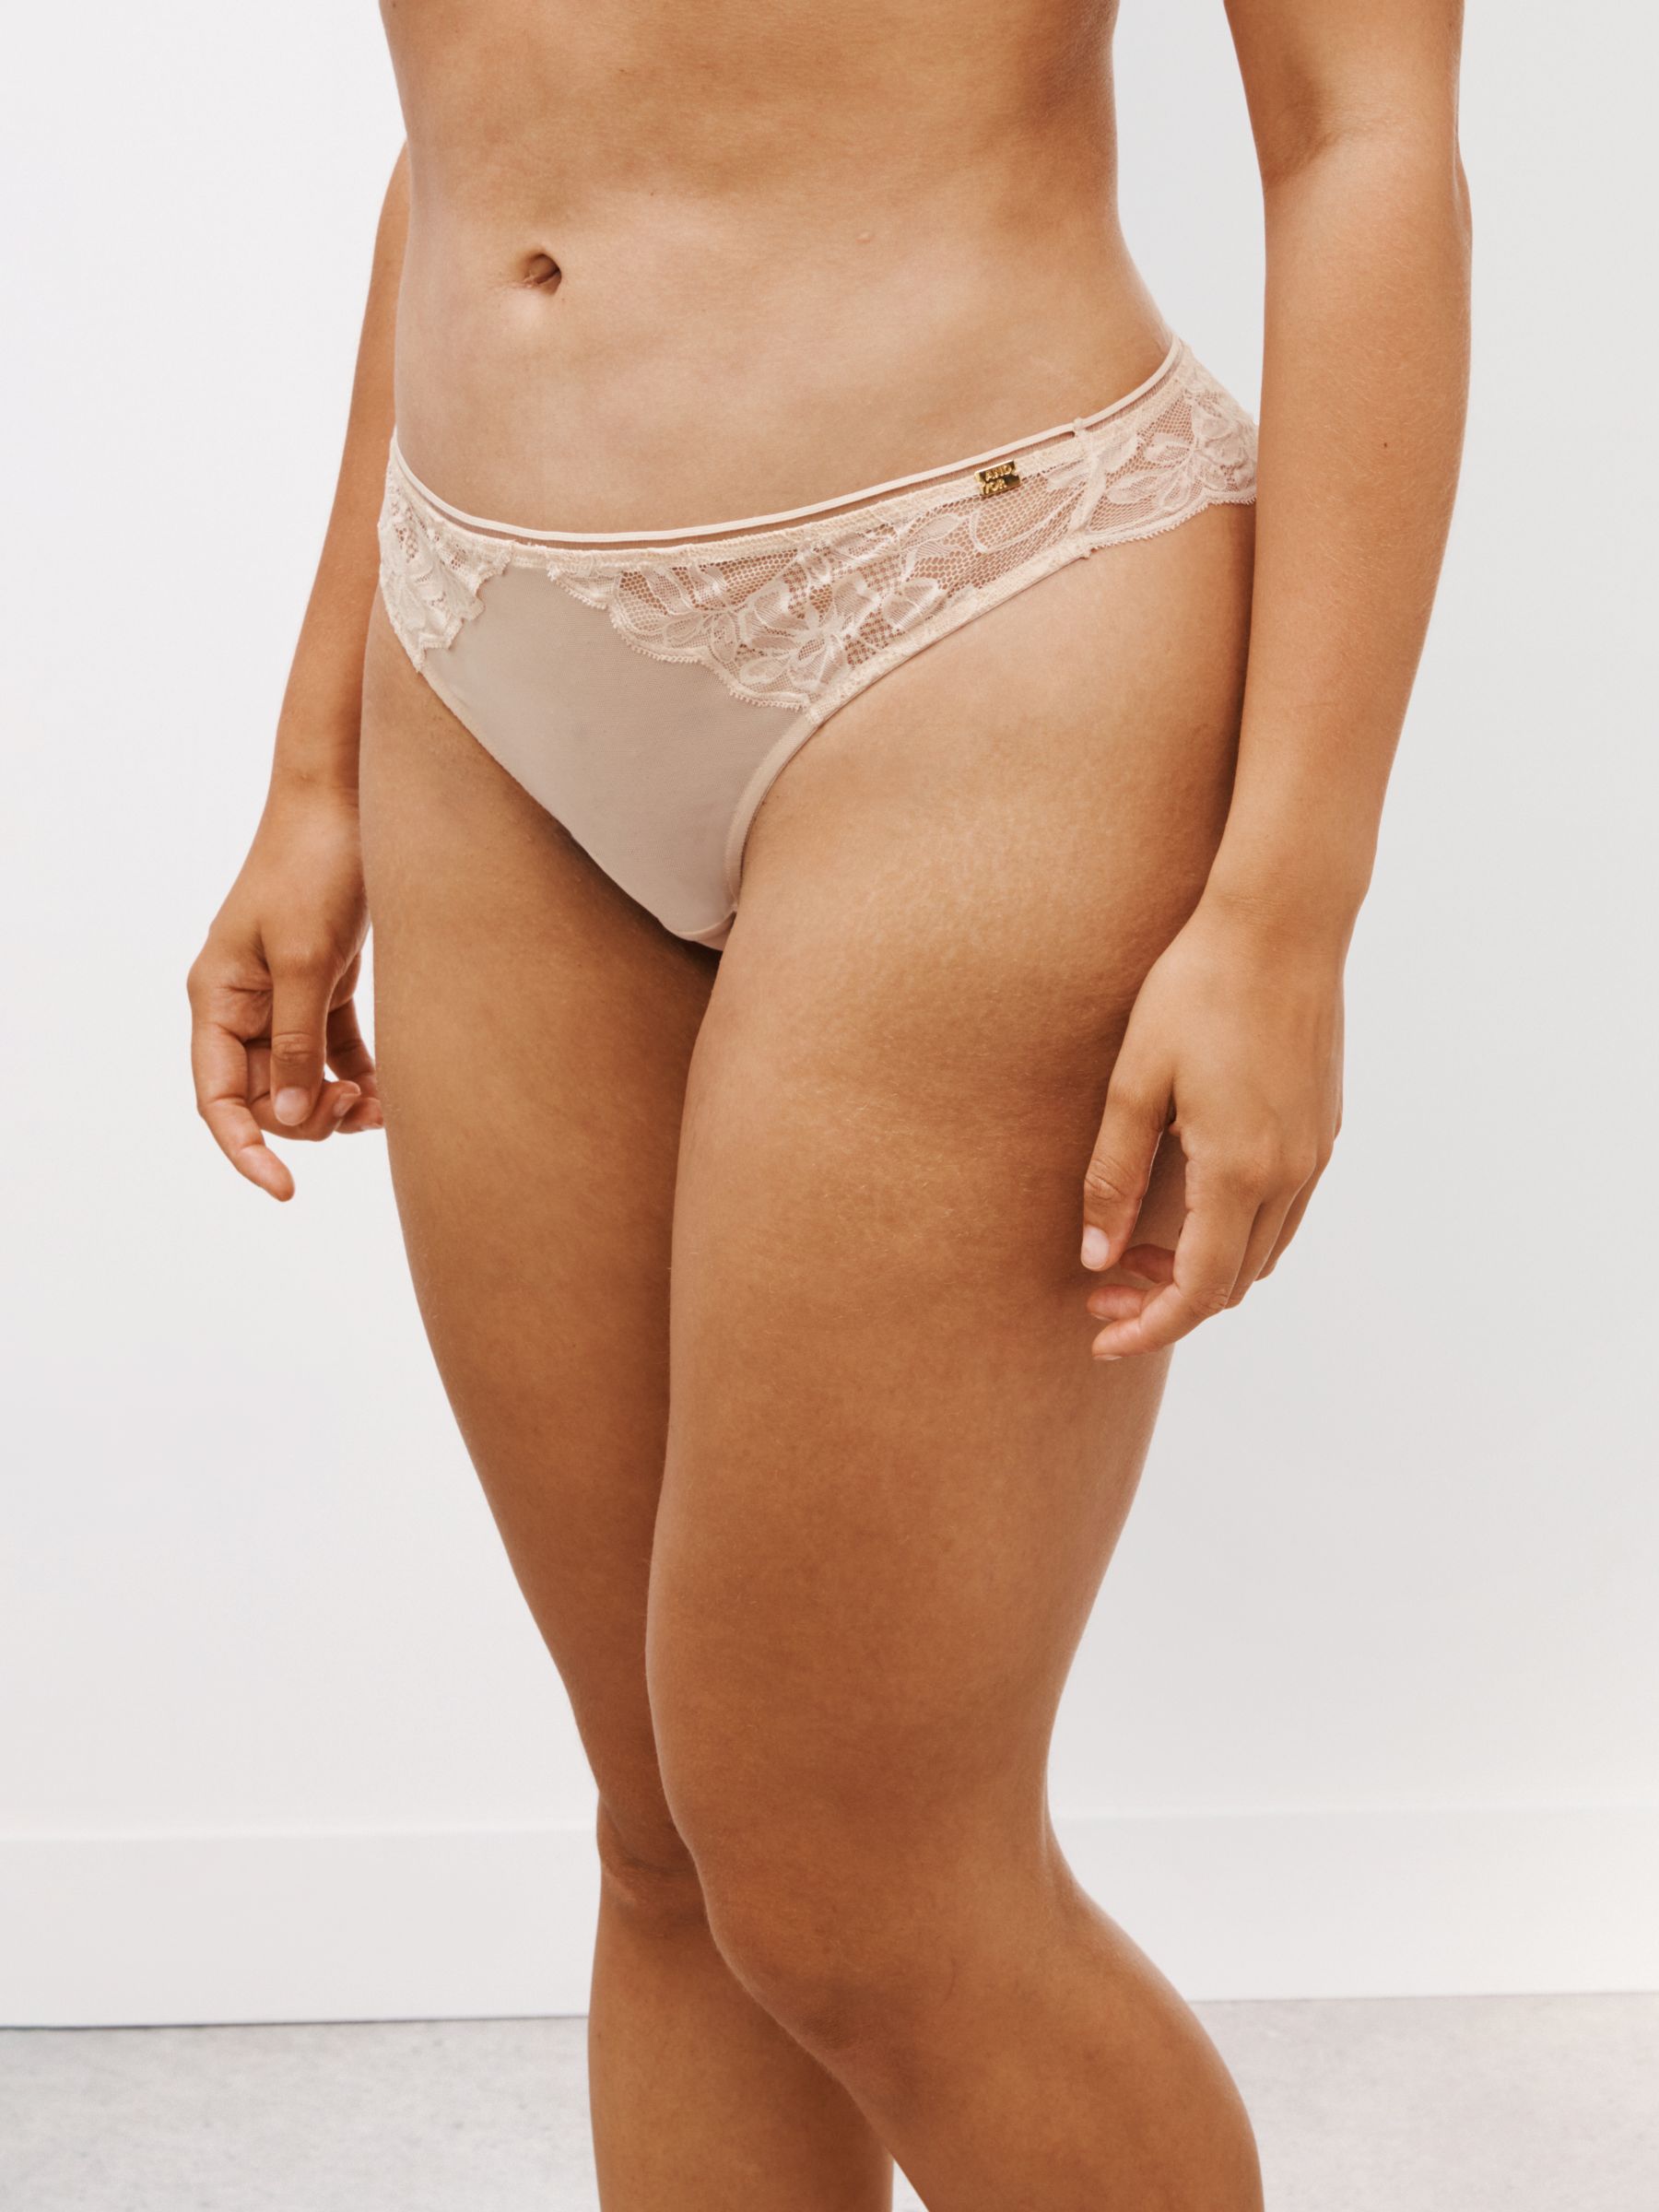 AND/OR Wren Lace Brazilian Knickers, Almond at John Lewis & Partners